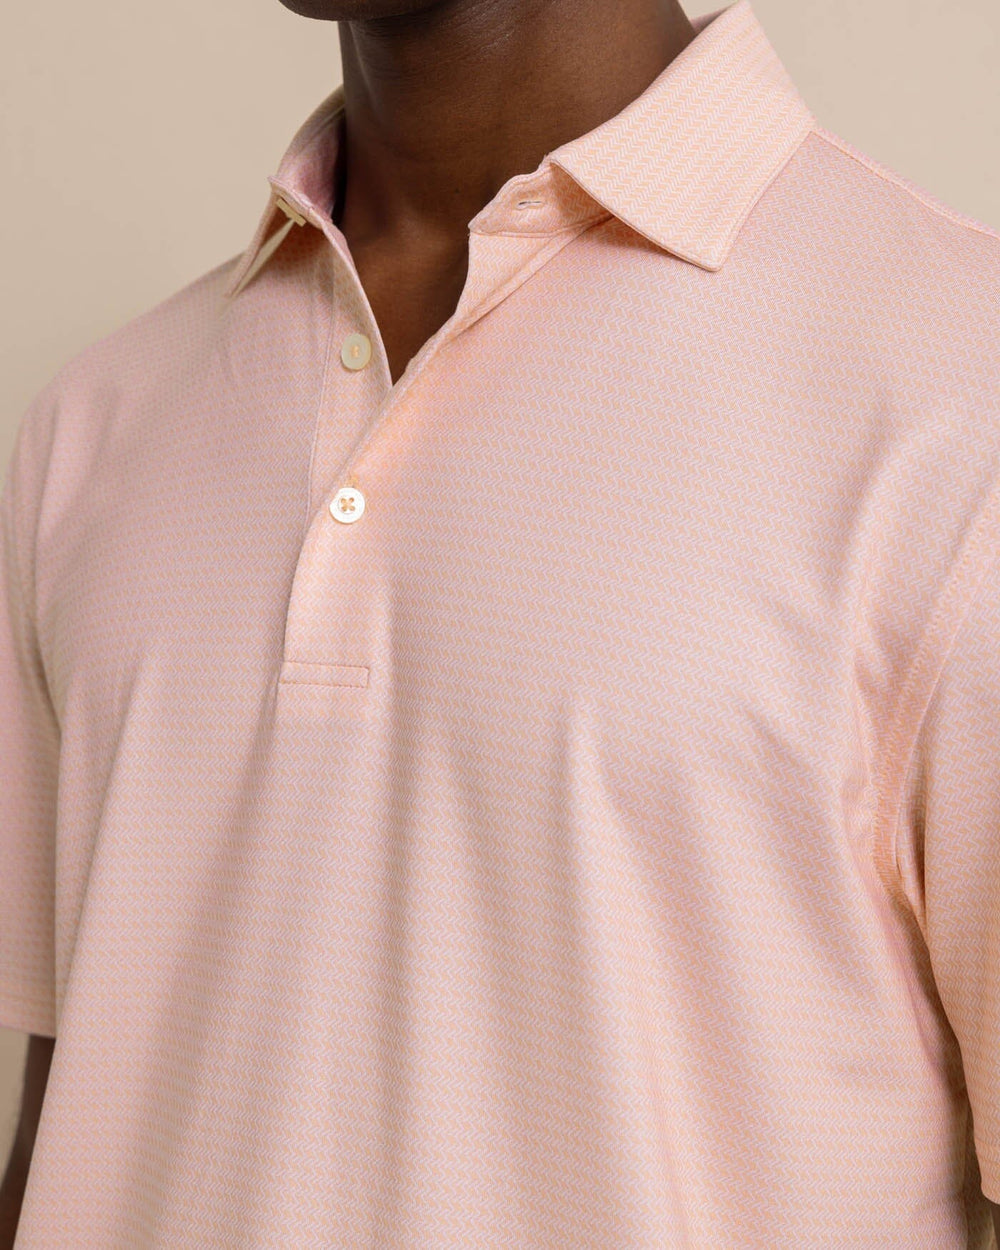 The detail view of the Southern Tide Driver Getting Ziggy With It Printed Polo by Southern Tide - Apricot Blush Coral